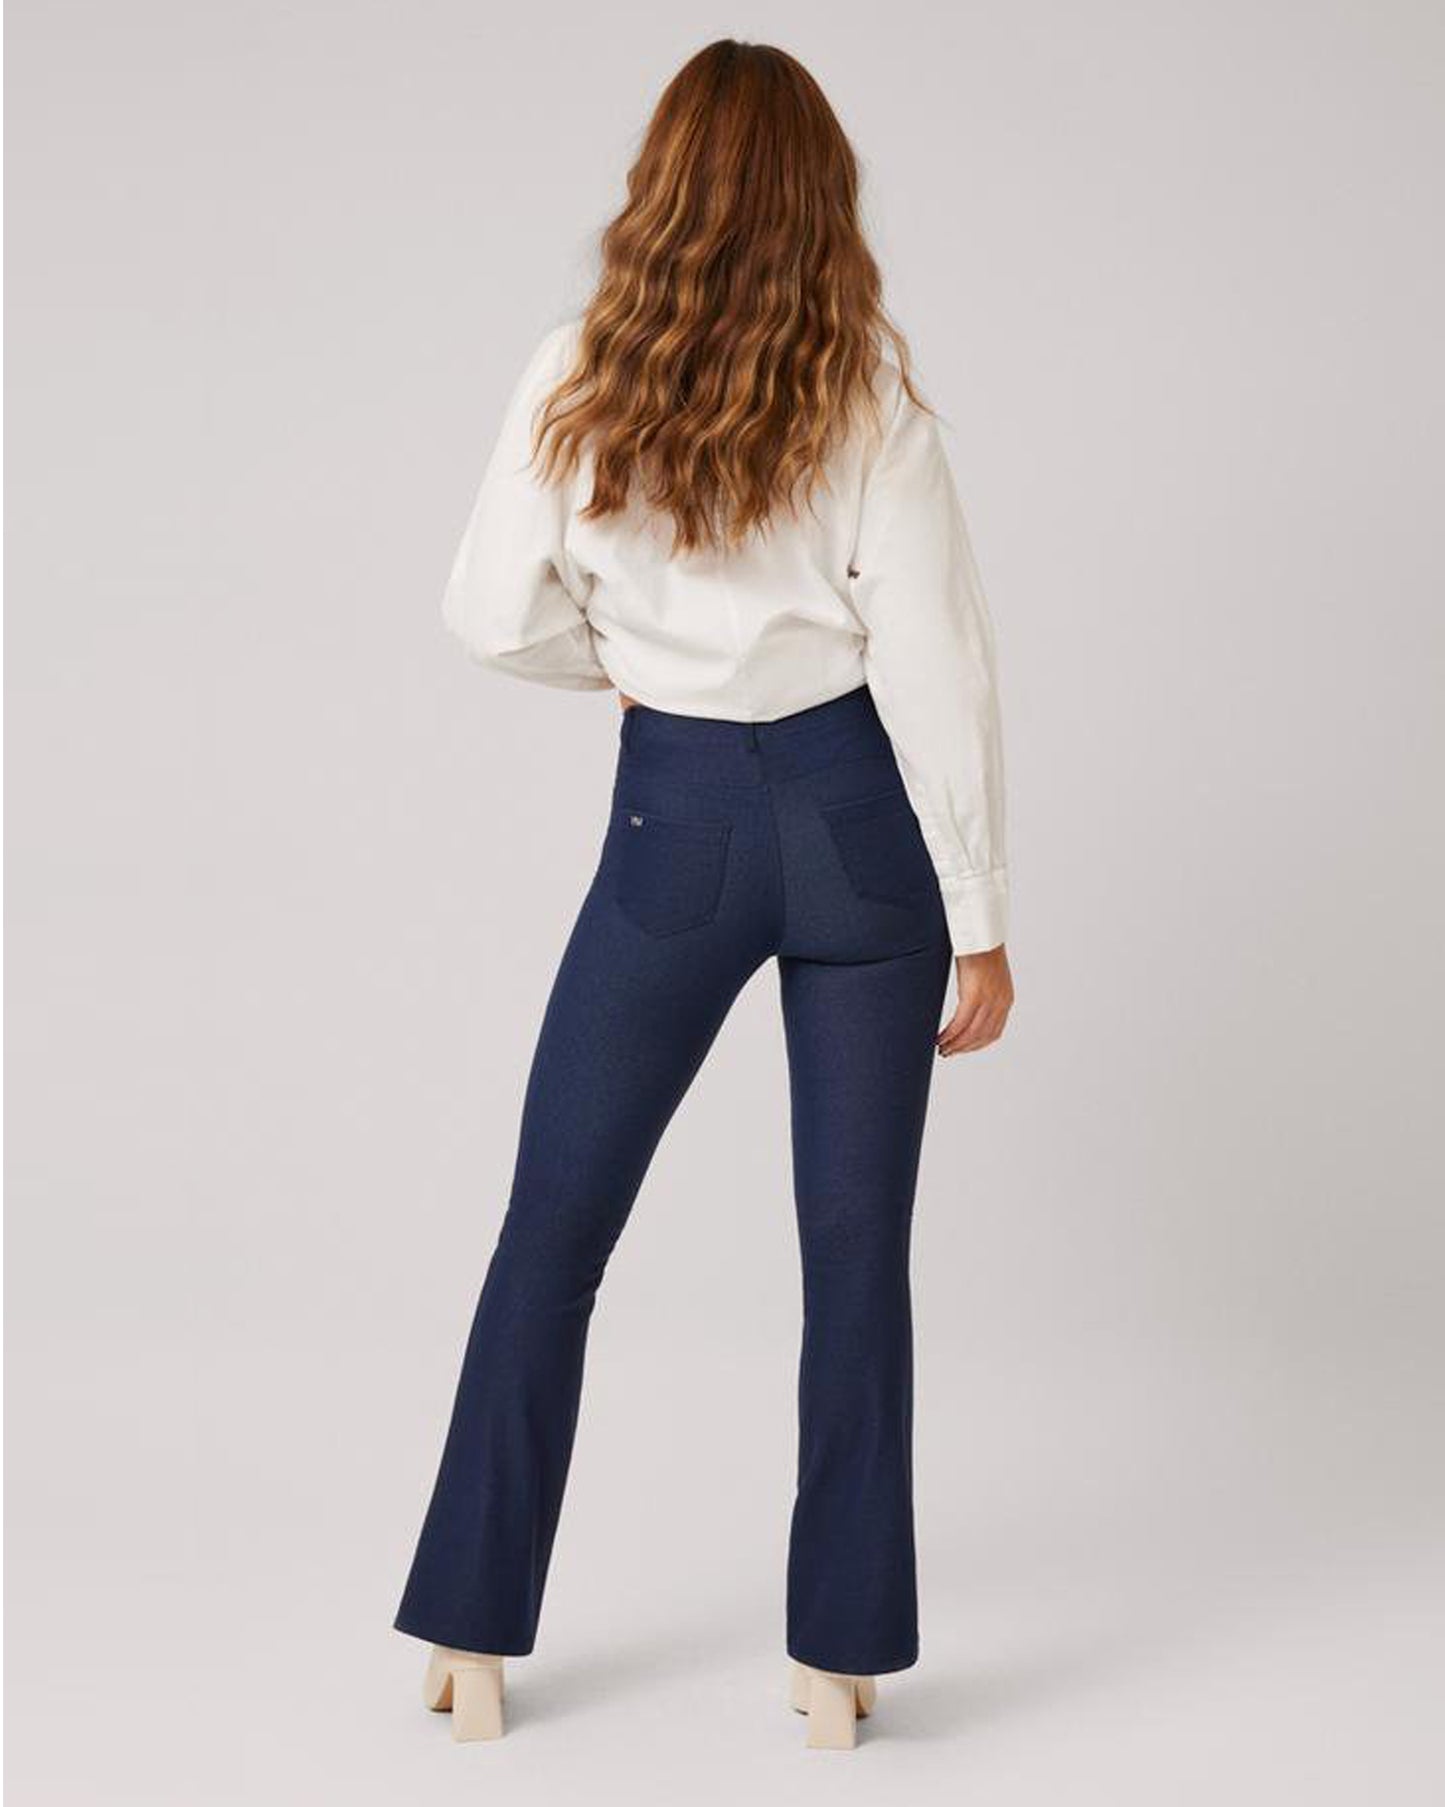 Ysabel Mora 70406 Flared Jeggings - Dark denim blue stretch high rise leggings with a flared boot leg, back pockets, belt loops and faux front pockets and fly top stitching.